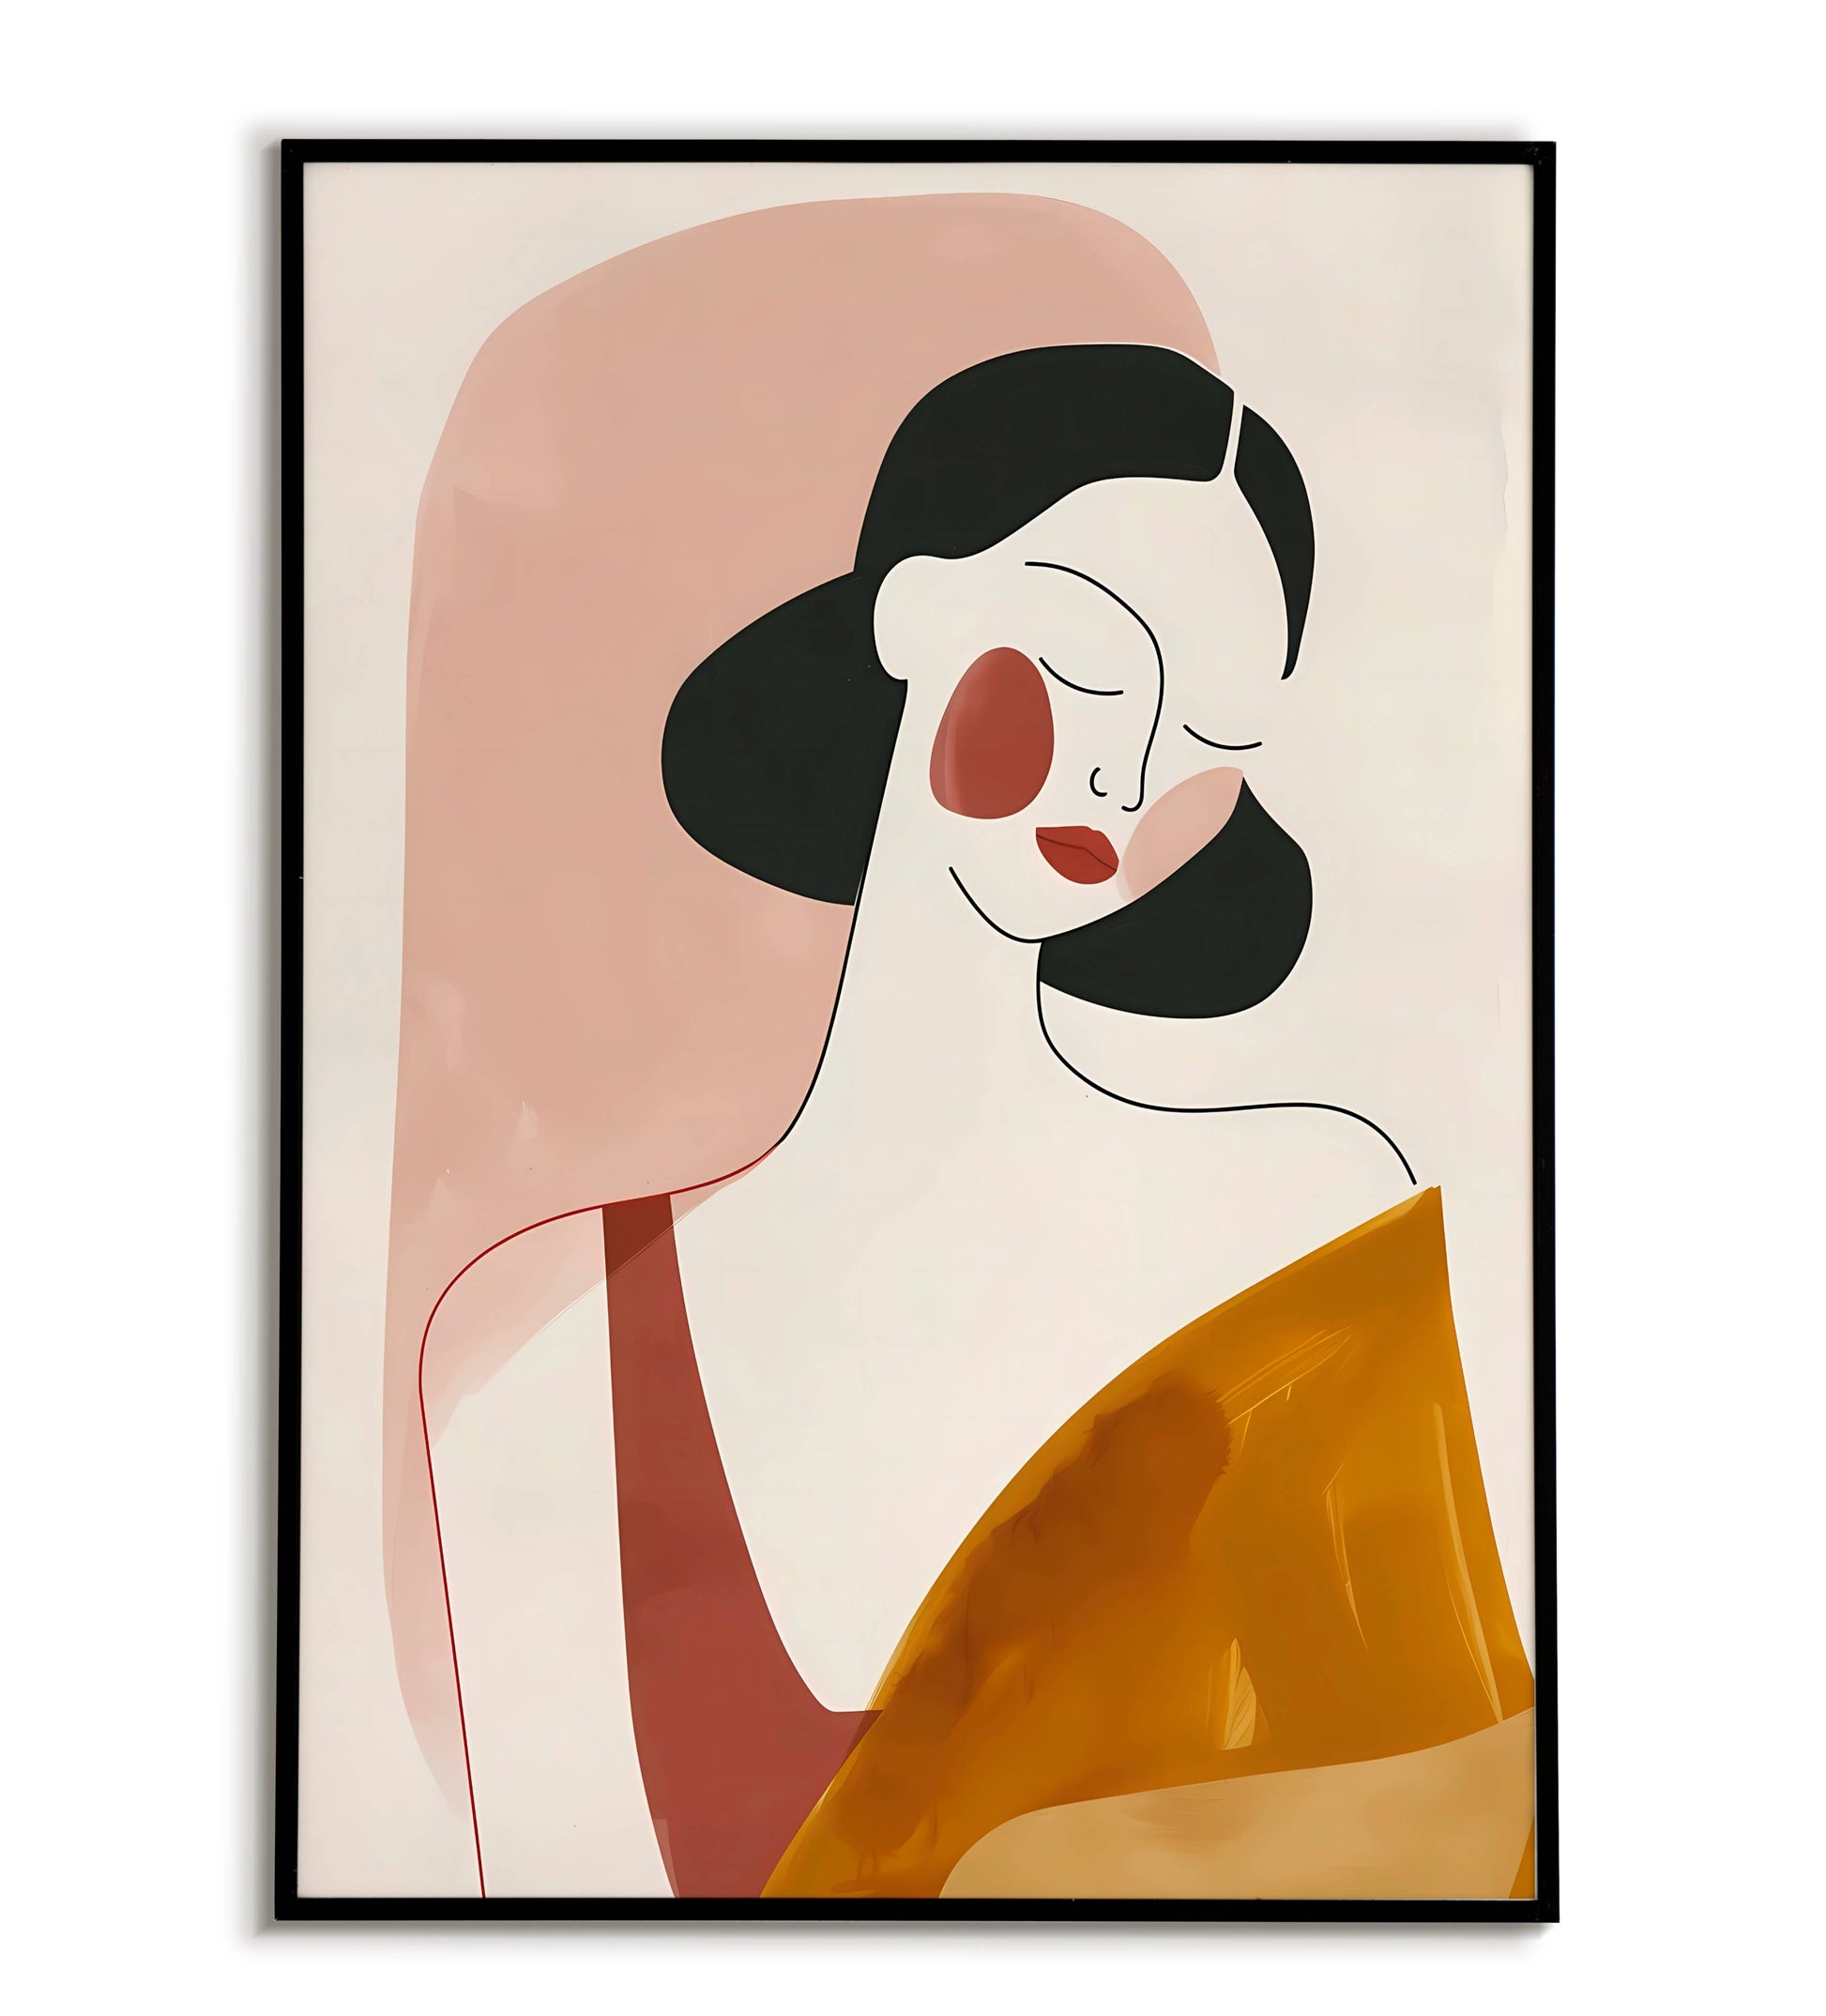 Minimalist Fashion Woman - Printable Wall Art / Poster. Download this elegant design to add a touch of sophistication and style to your decor.